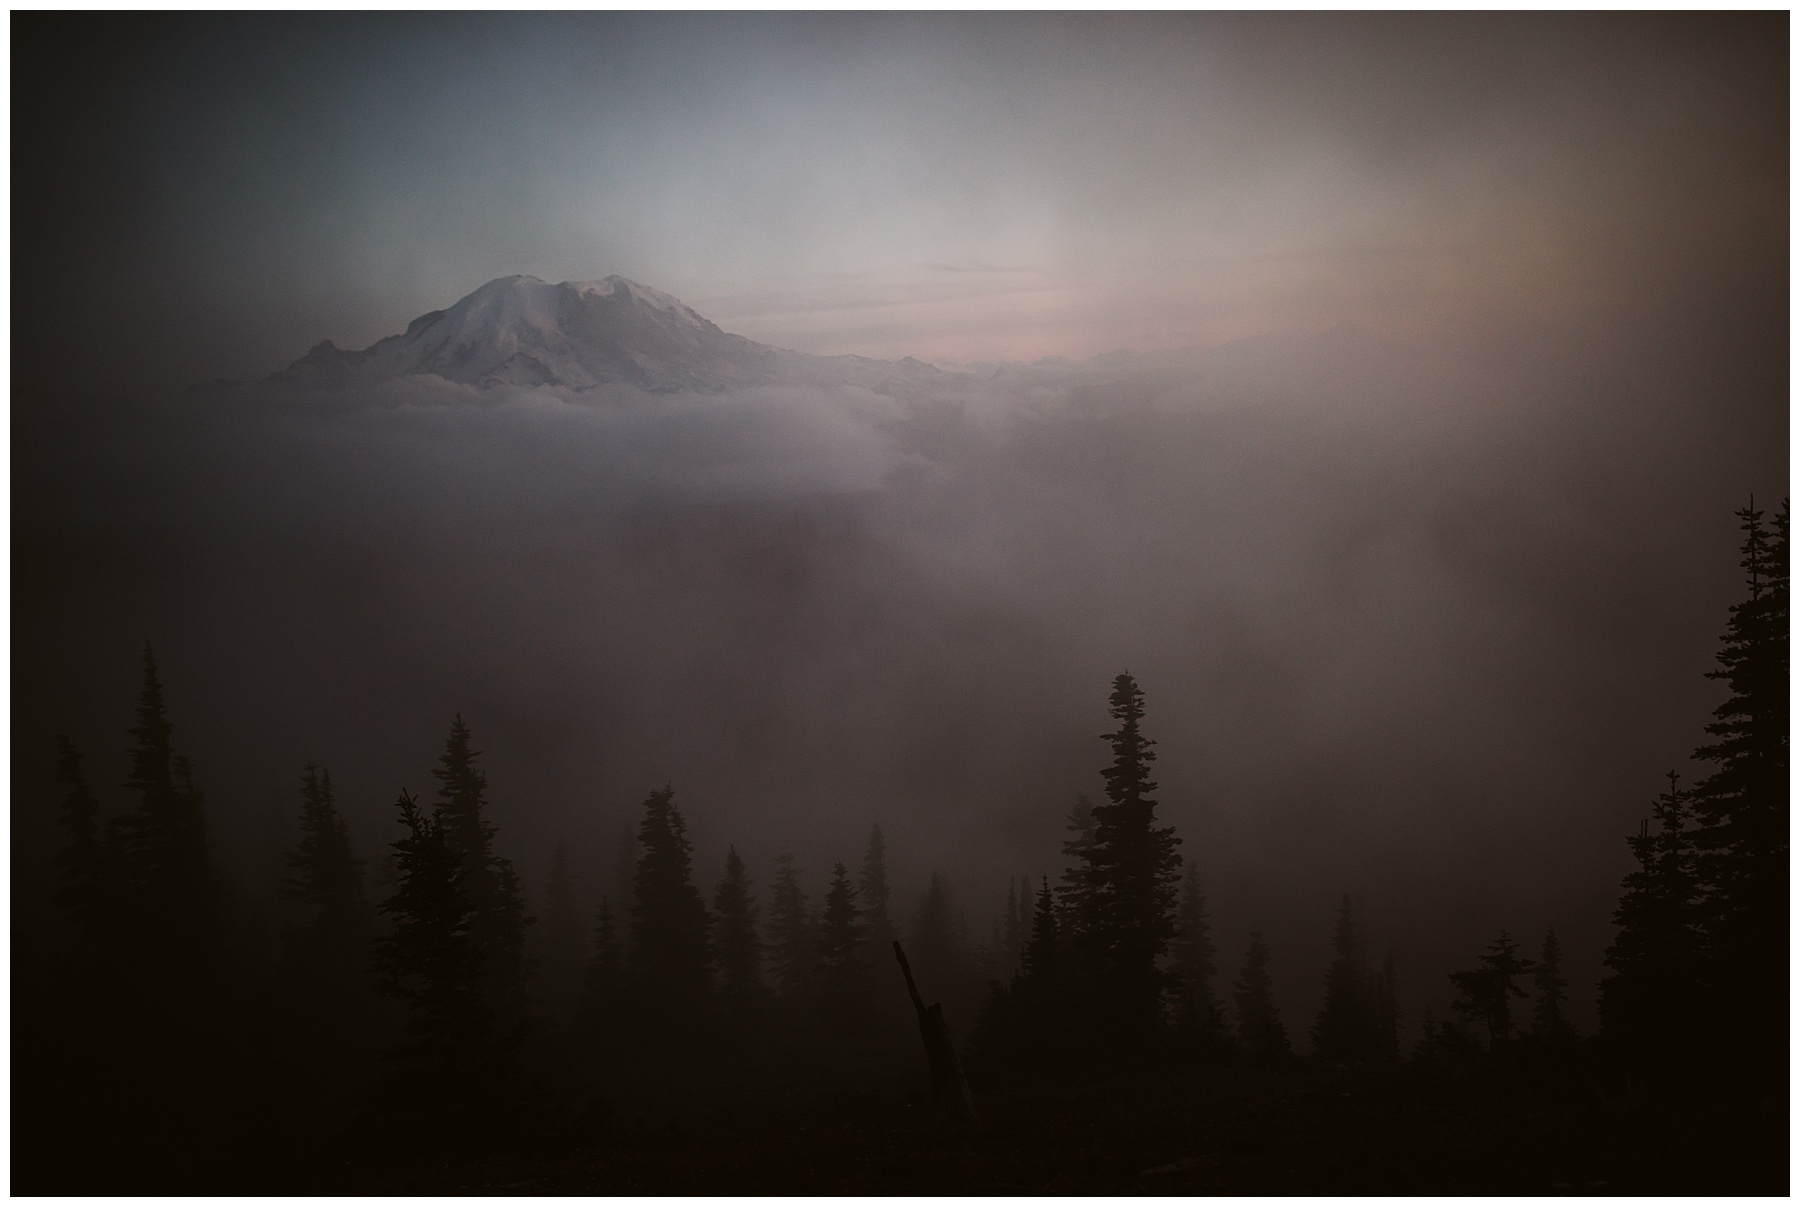 mount rainier at sunset on a foggy day after emily and jay's elopement.